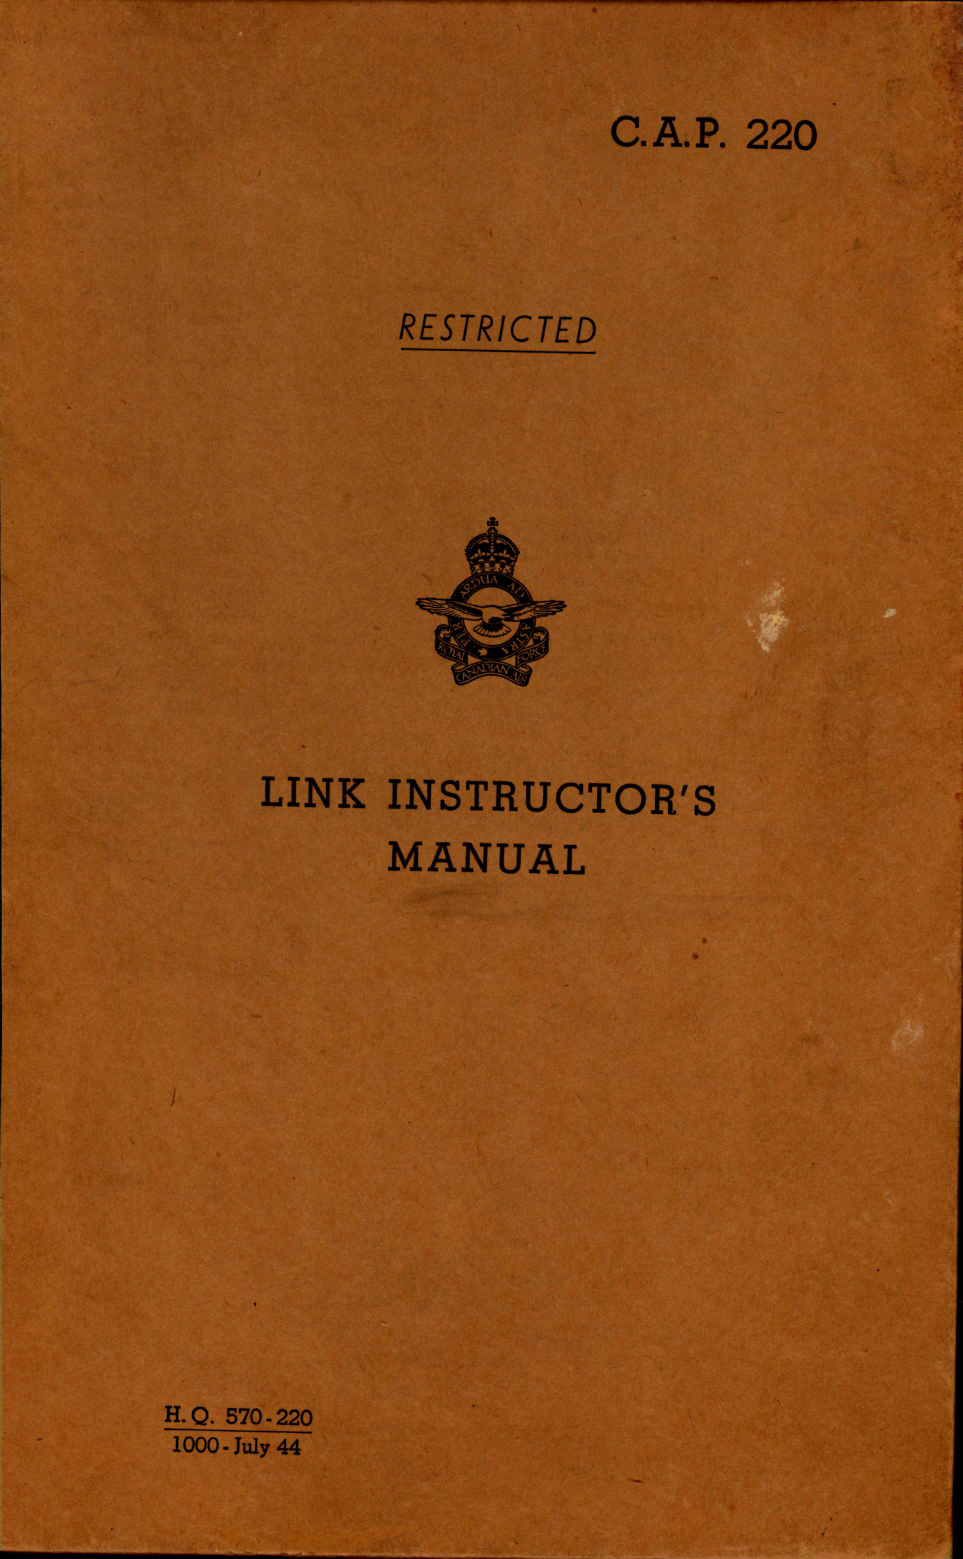 Sample page 1 from AirCorps Library document: Link Instructor's Manual